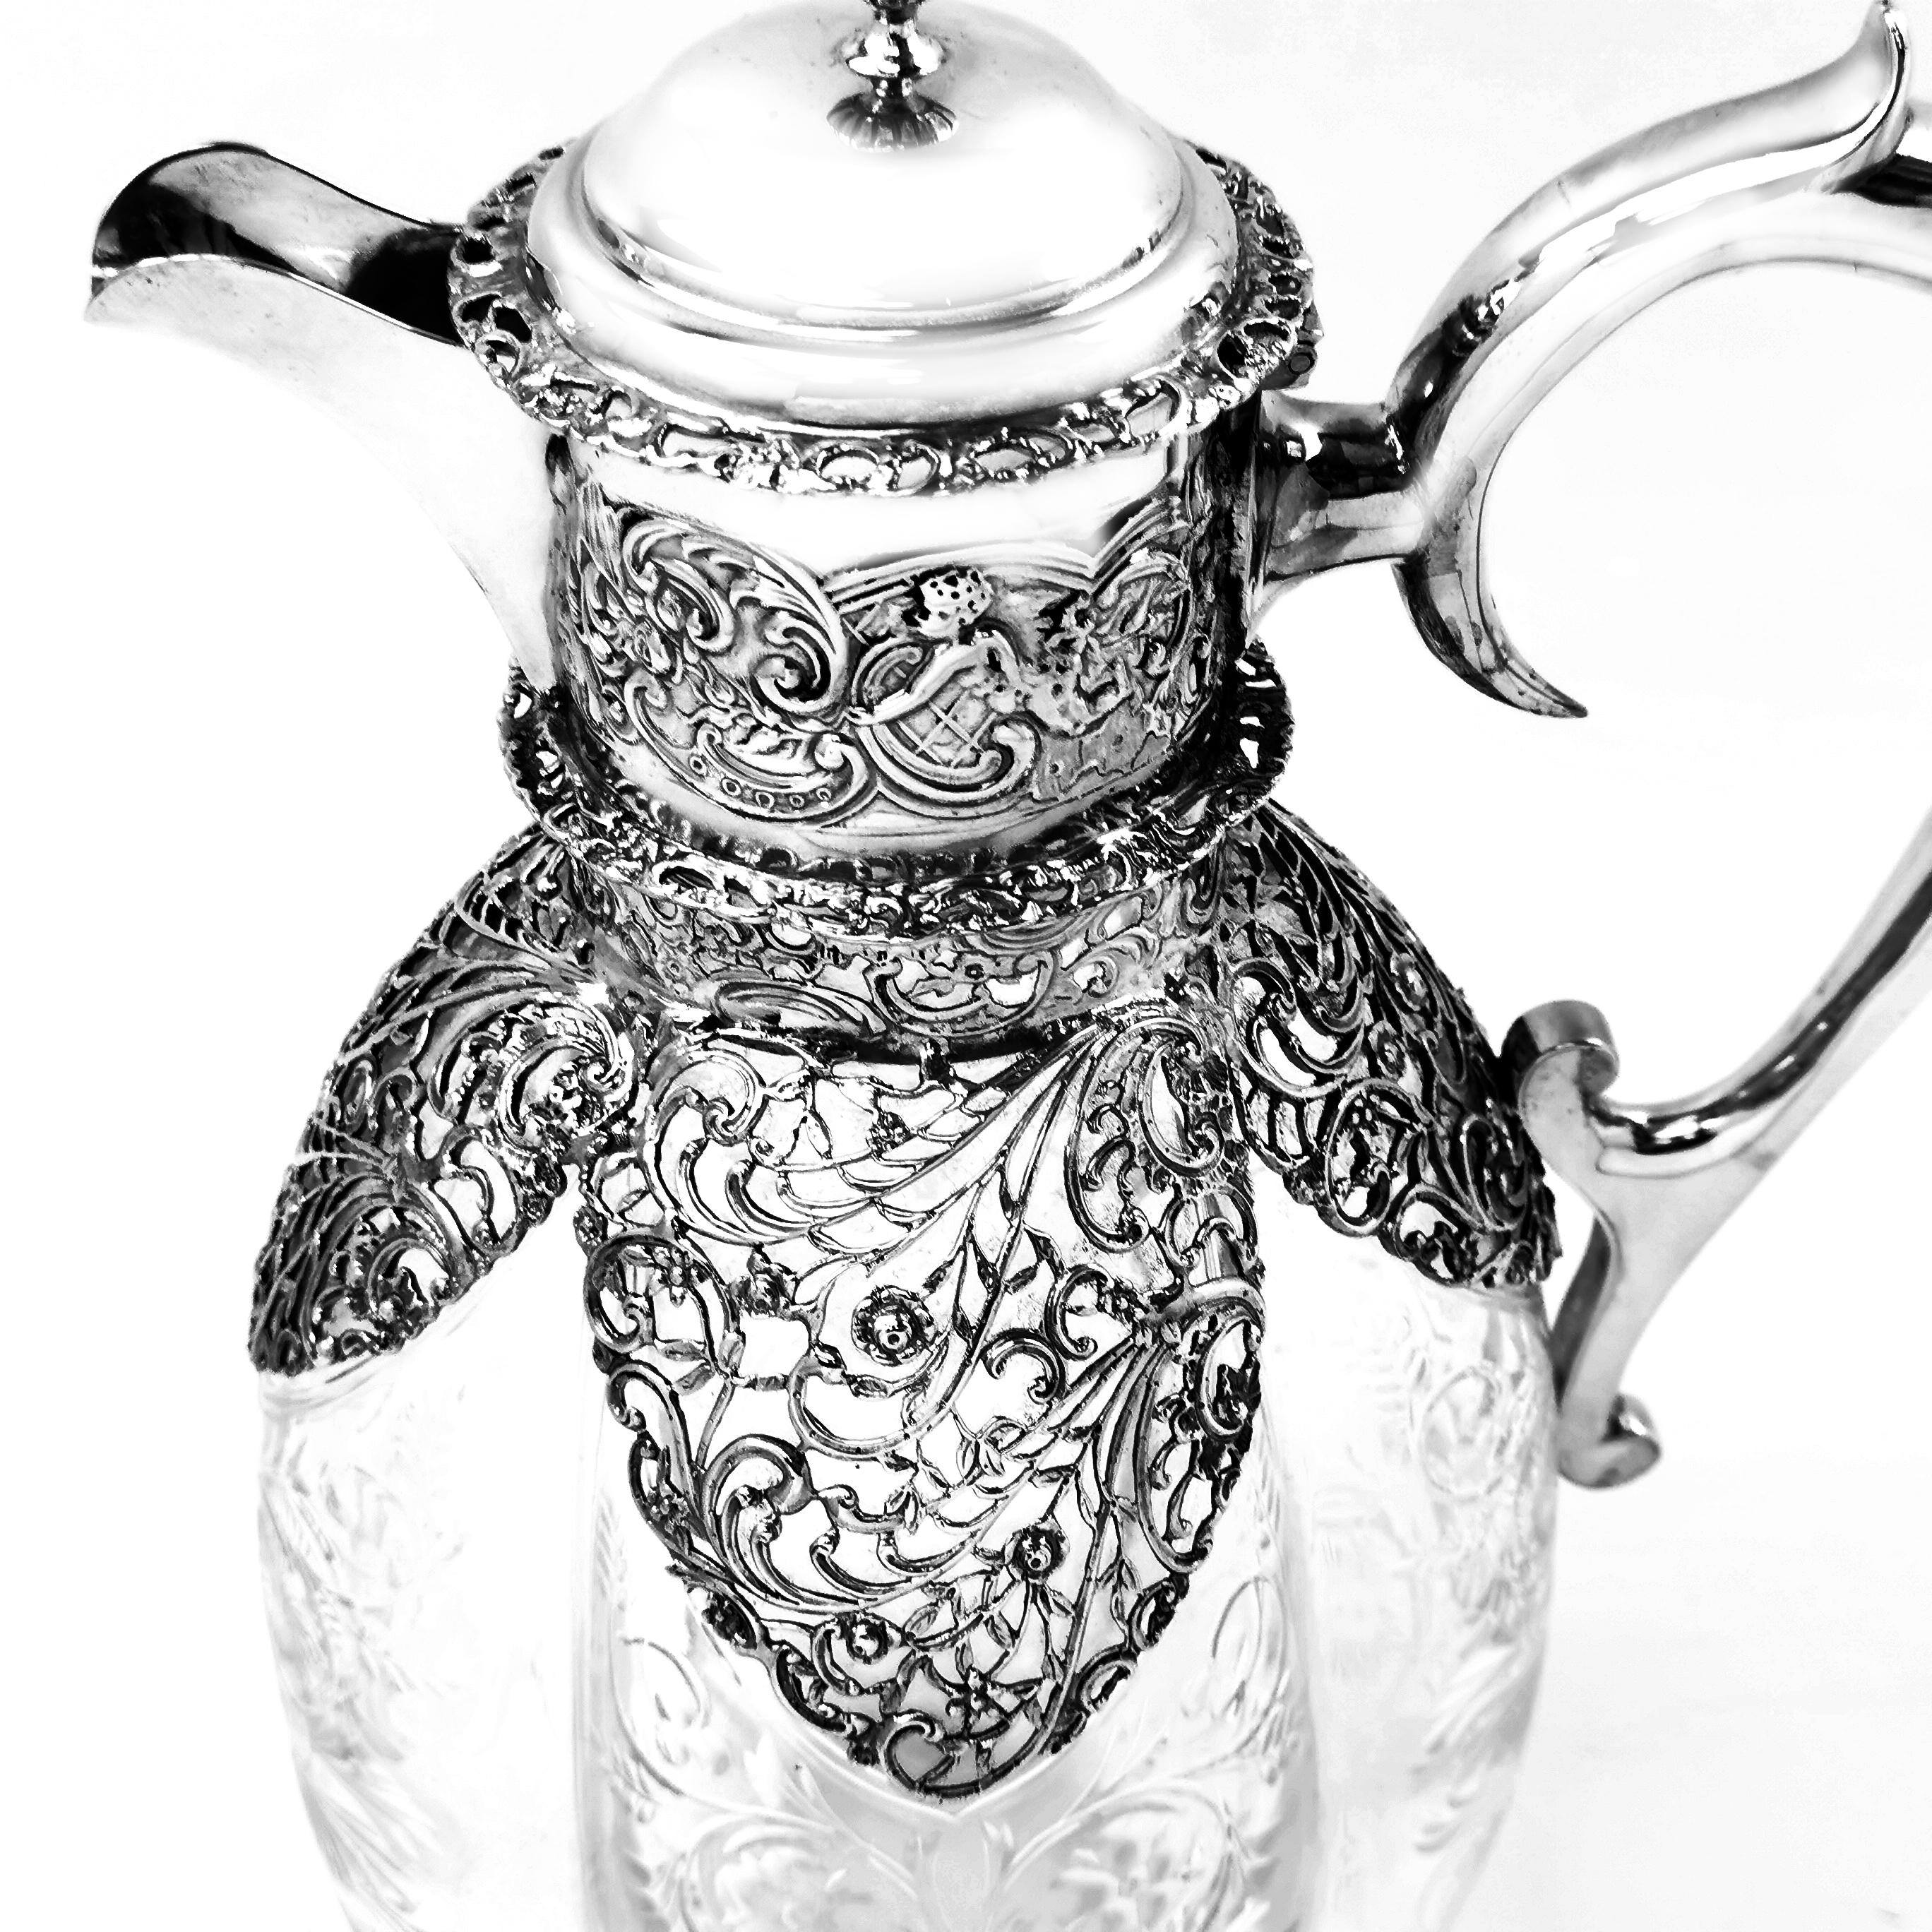 20th Century Antique Edwardian Sterling Silver & Cut Glass Claret Jug or Wine Decanter 1904